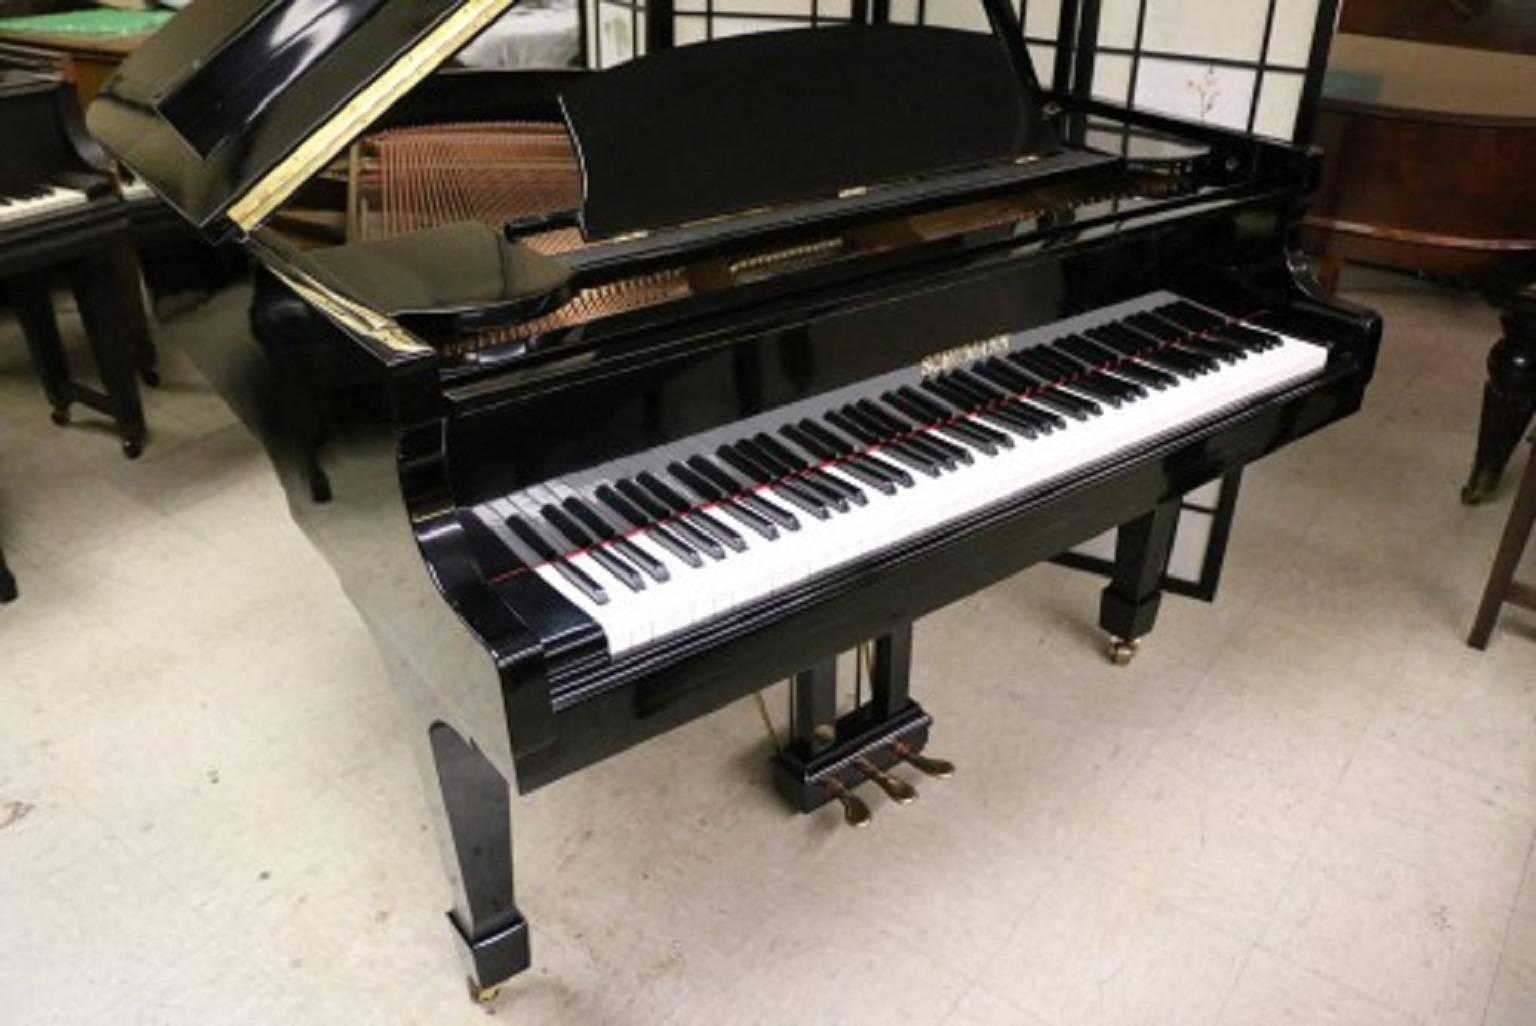 American Ebony Gloss Schumann Baby Grand Piano Made by Samick Excellent Inside and Out